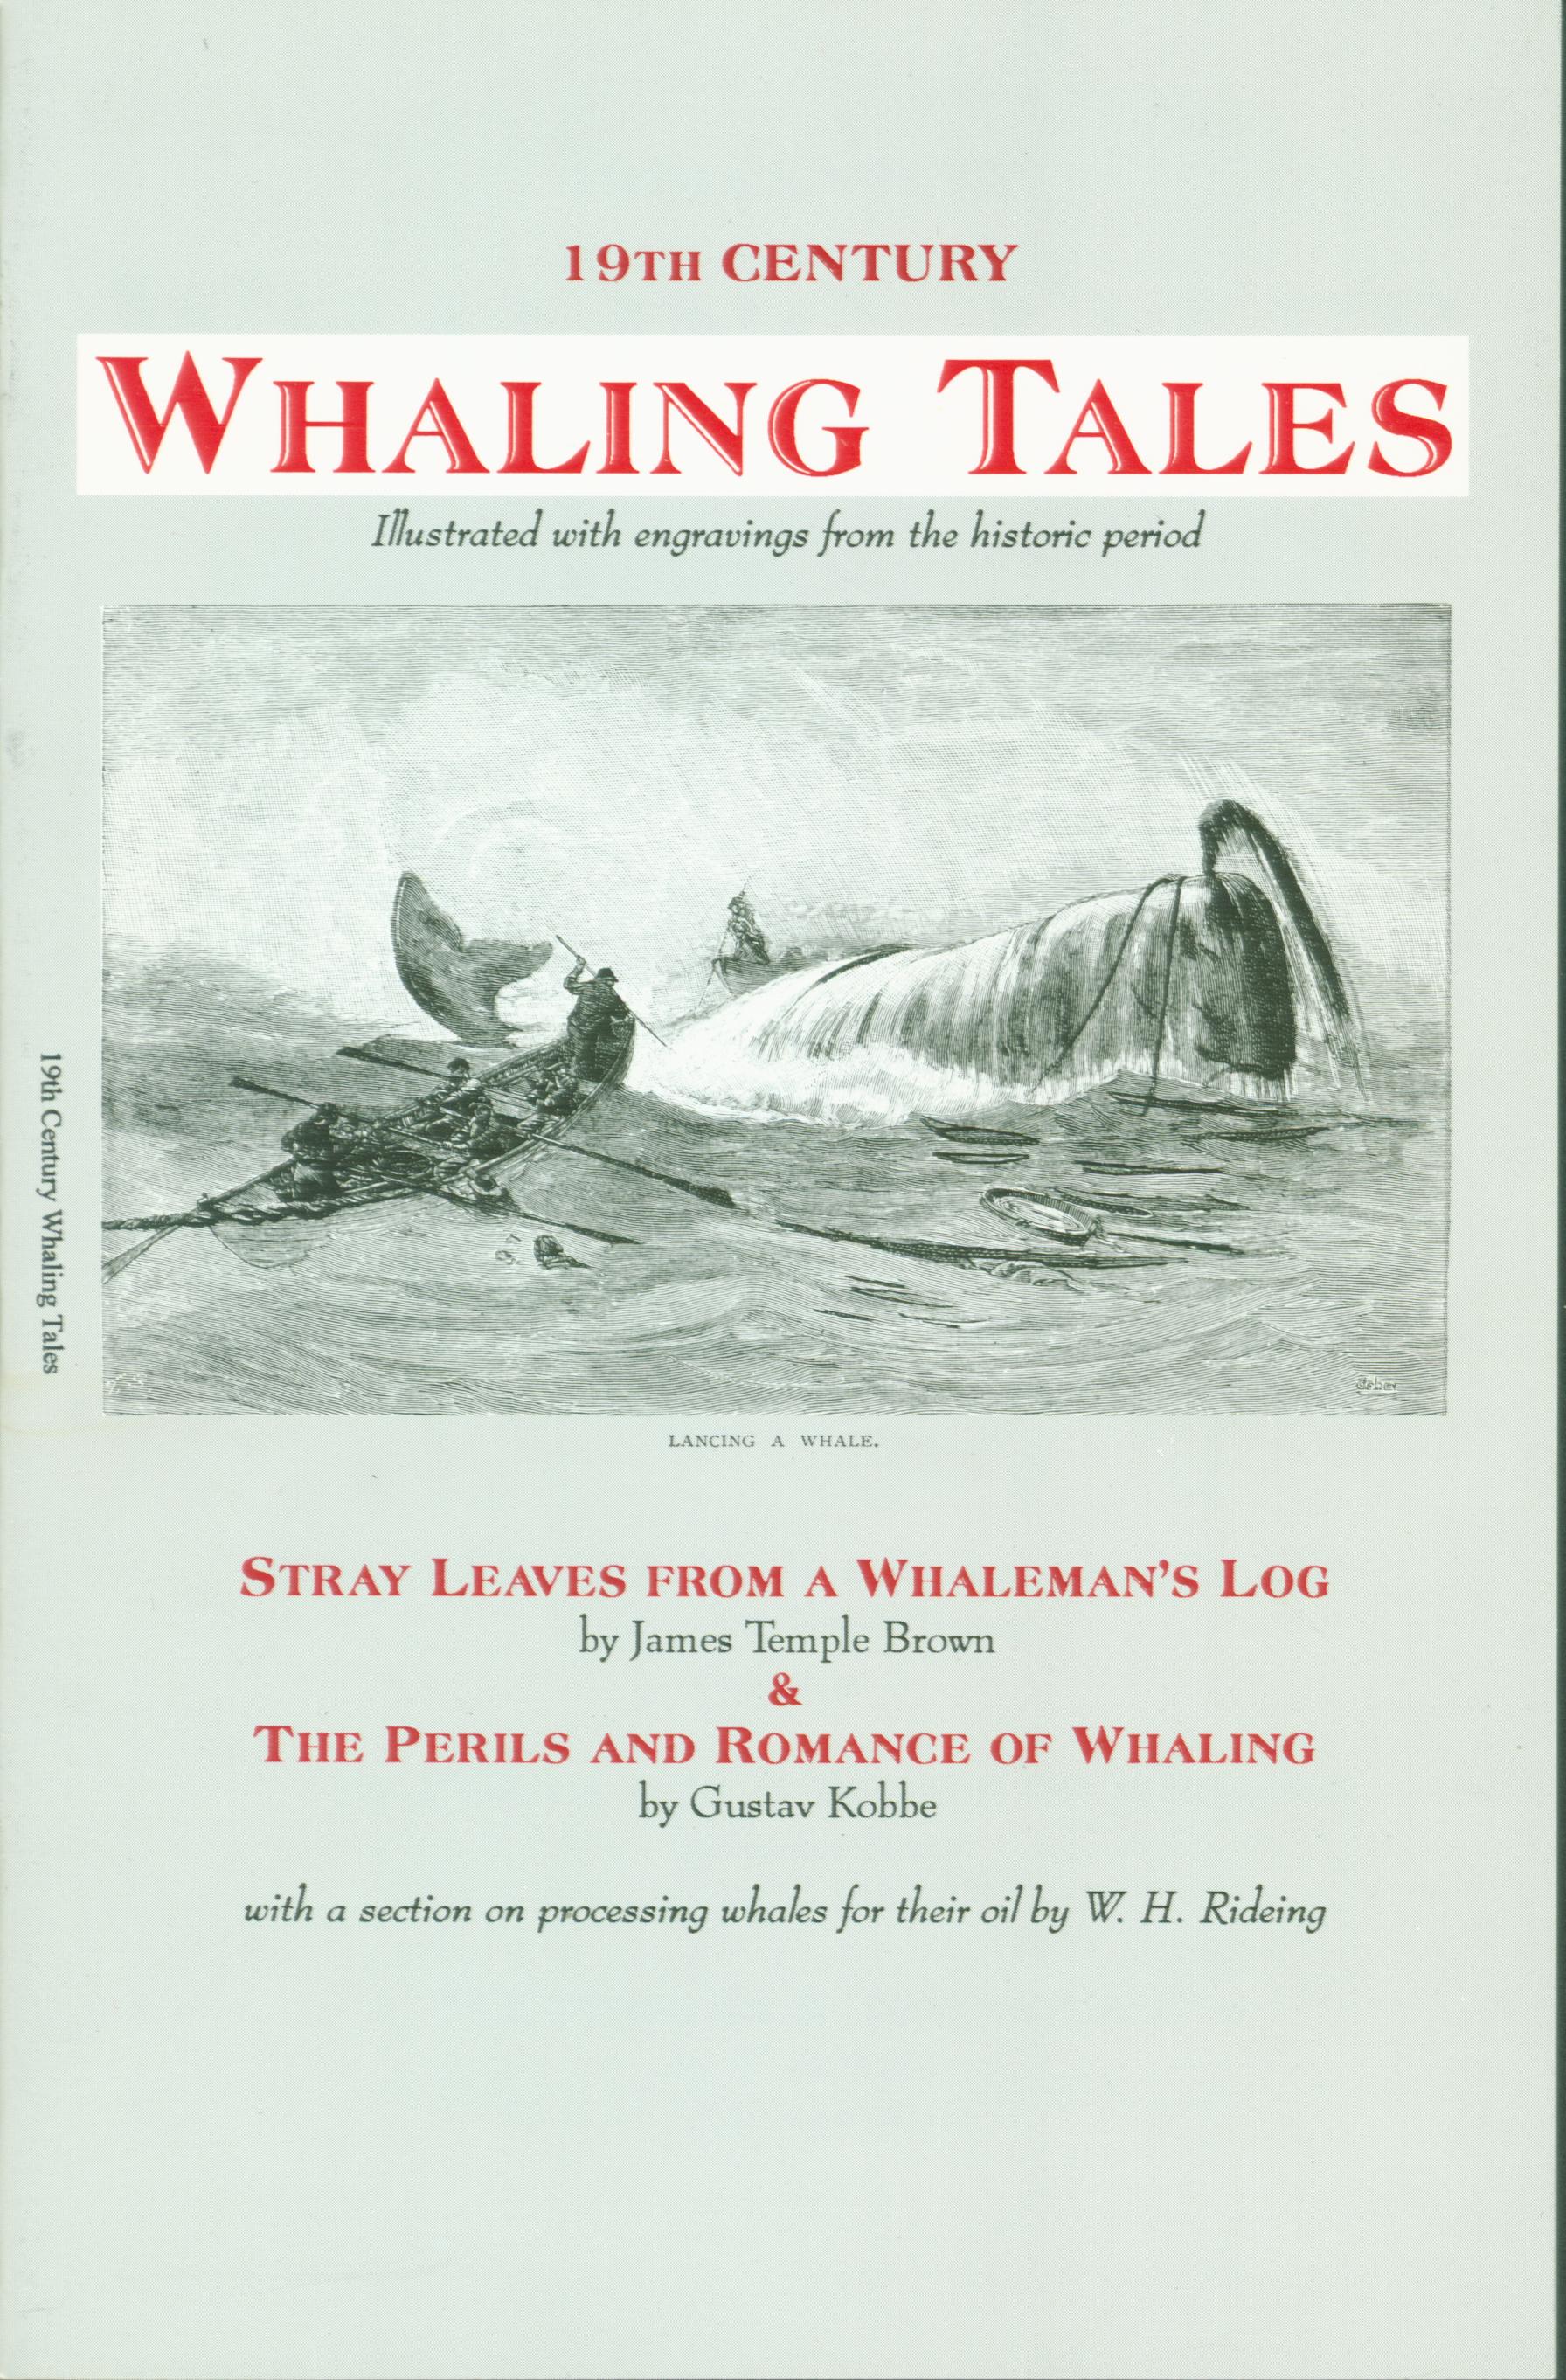 19th CENTURY WHALING TALES. vist0089a front cover